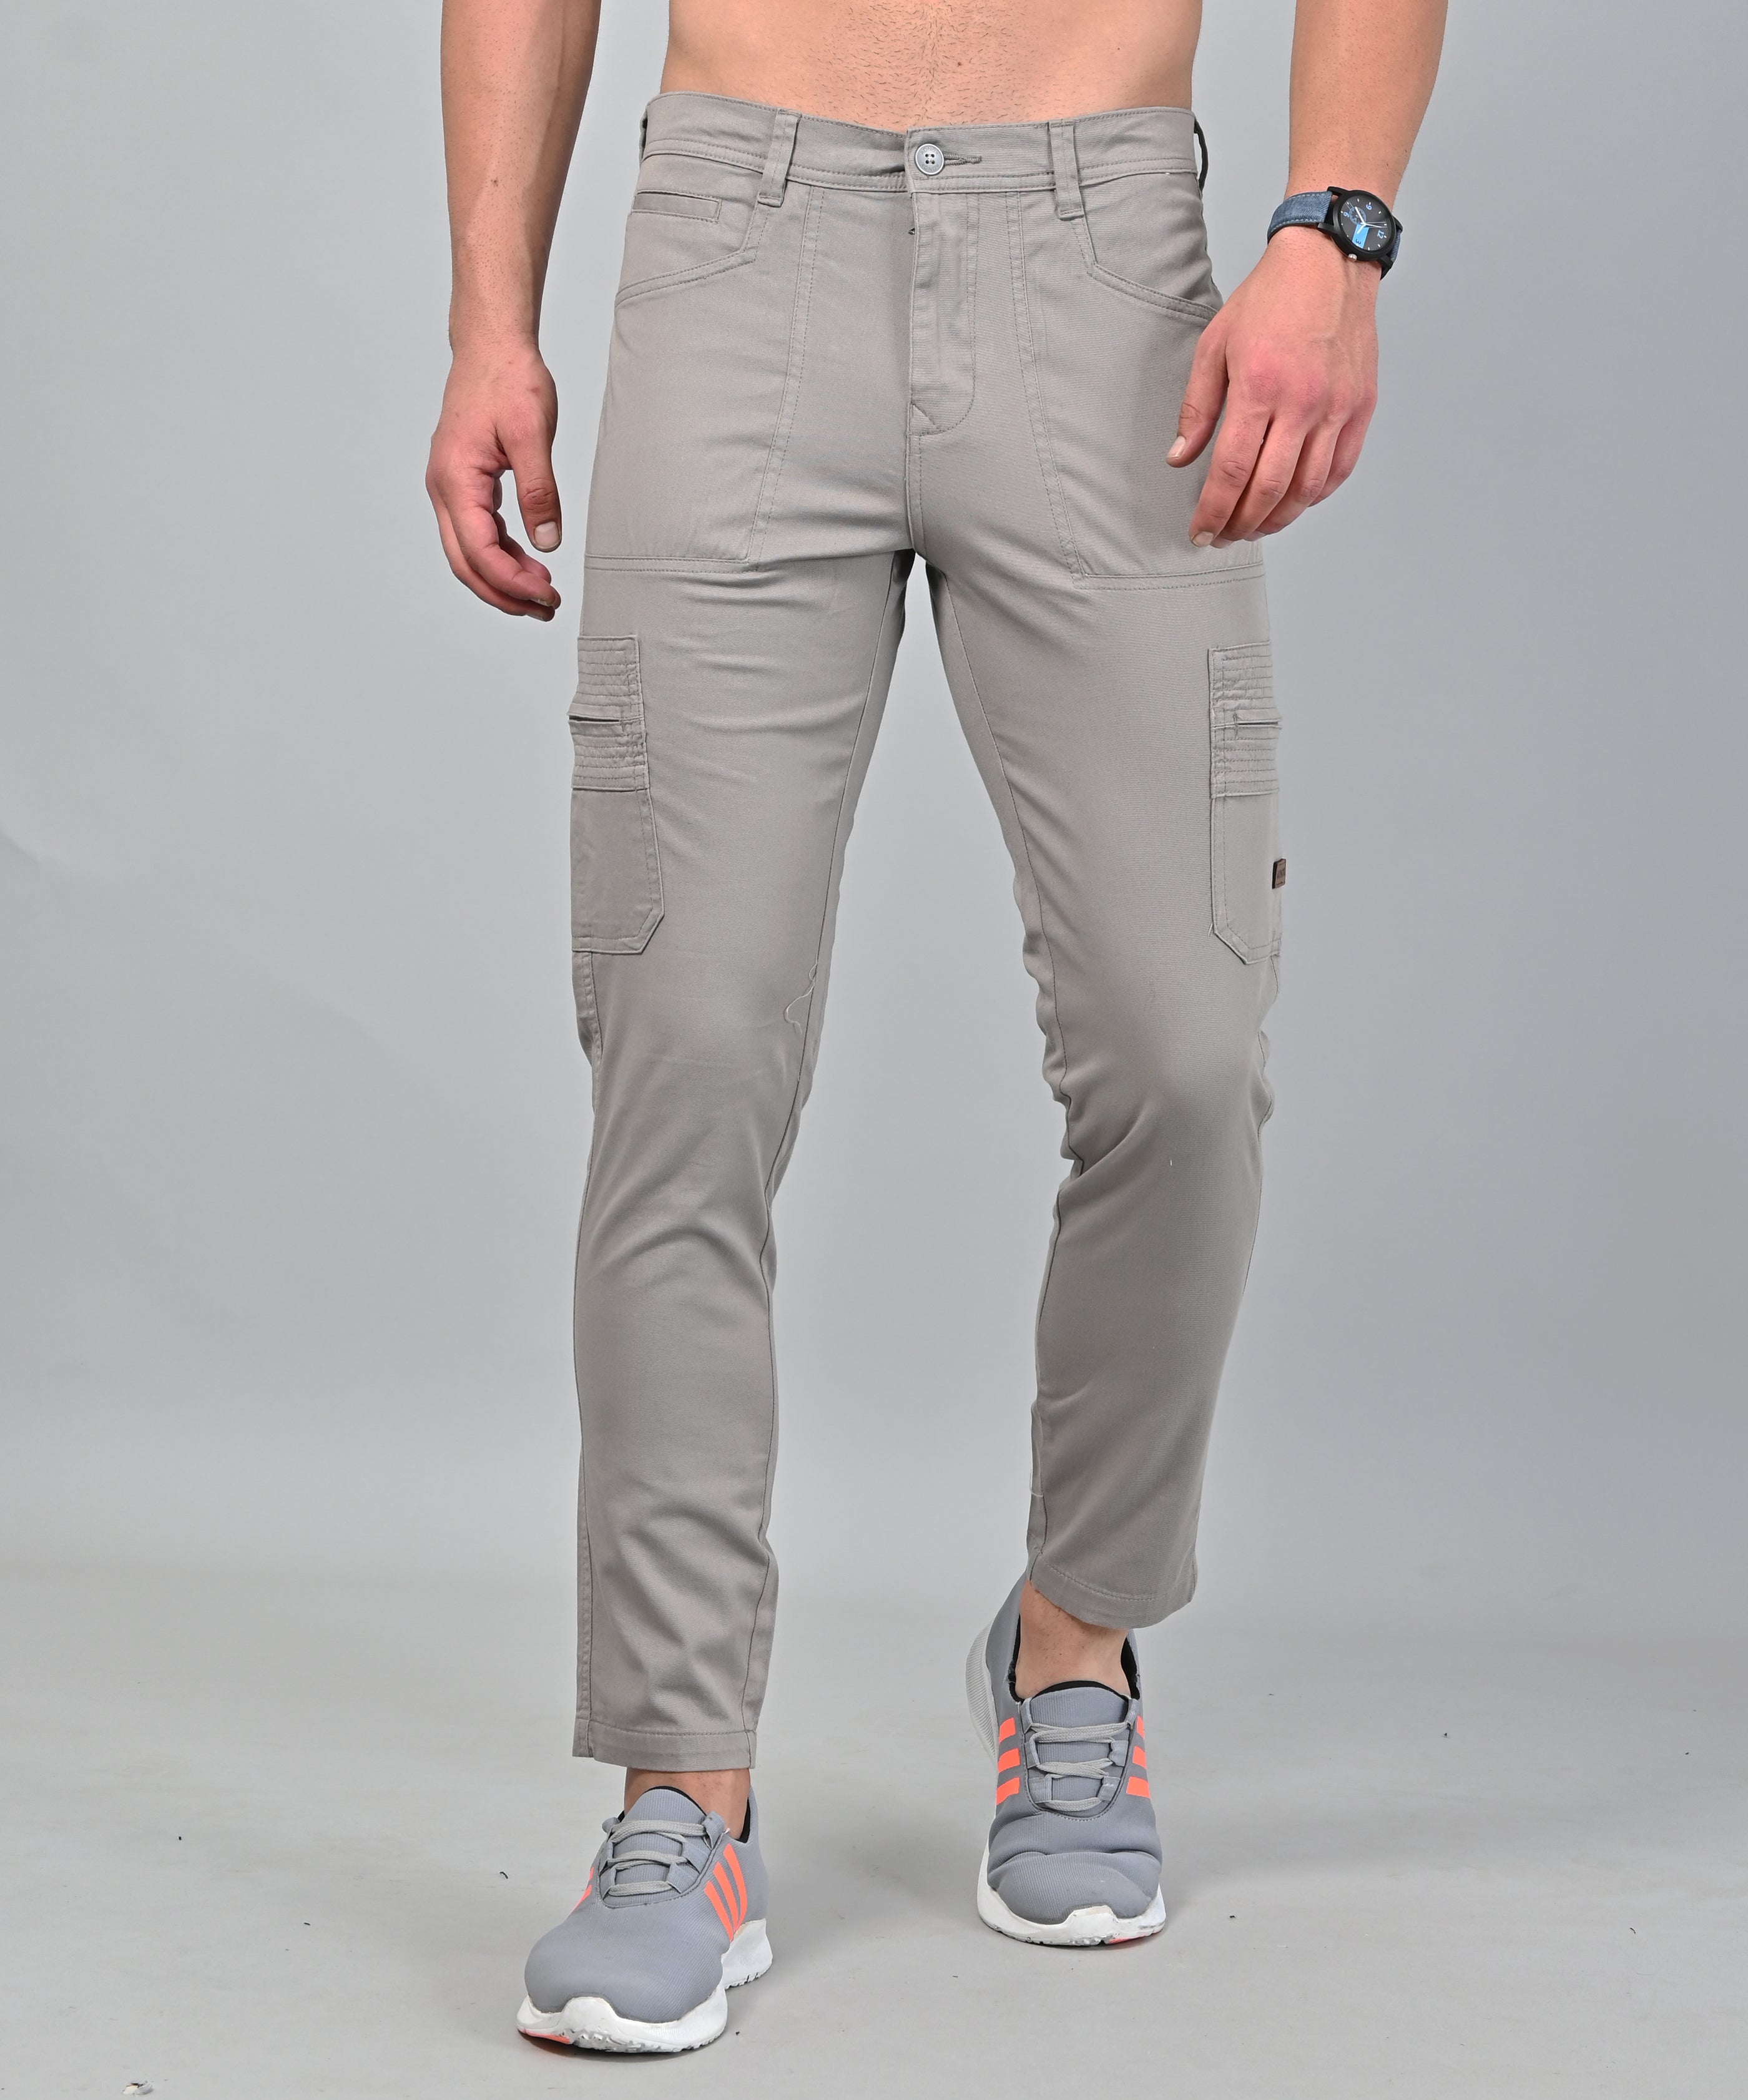 Casual Cotton Men's Cargo Pant, Fawn Color Cargo, Beige Color Cargo,  Relaxed Fit Cargo, Good Quality